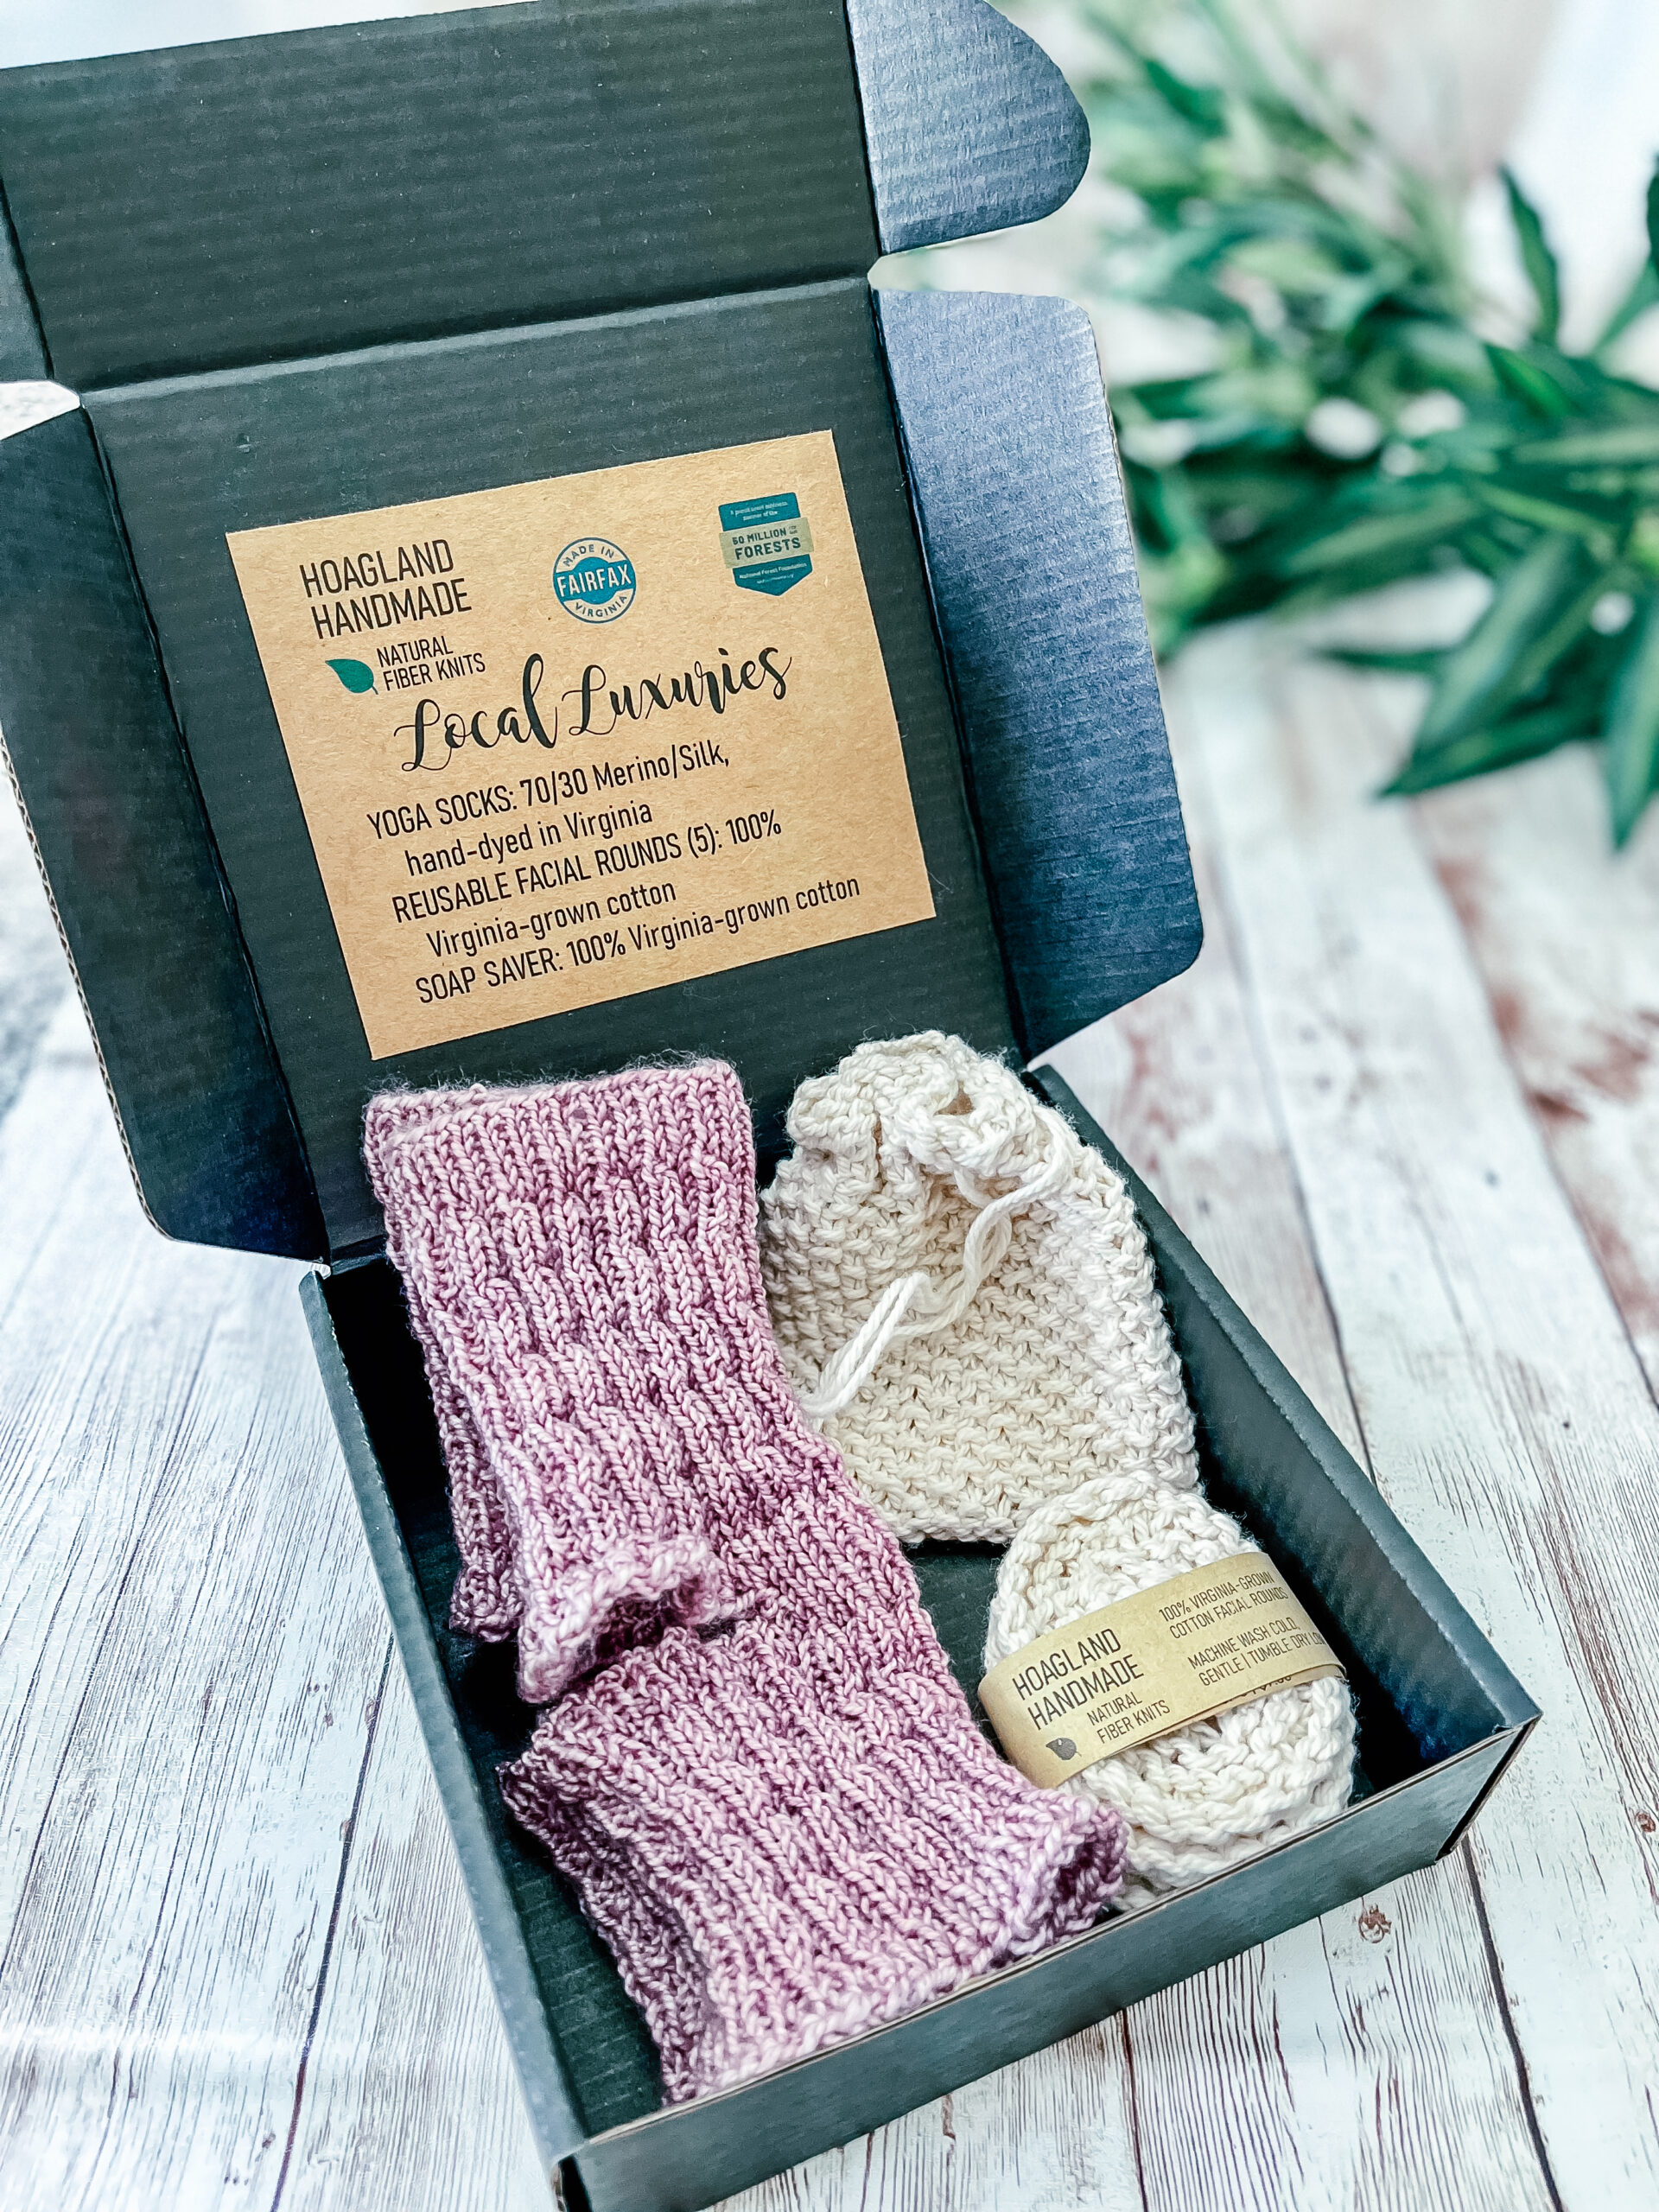 A black box contains a pair of hand-dyed merino/silk pink yoga socks, a Virginia-grown cotton soap saver and set of reusable facial rounds. The box sits on a wood panel with greenery in the background